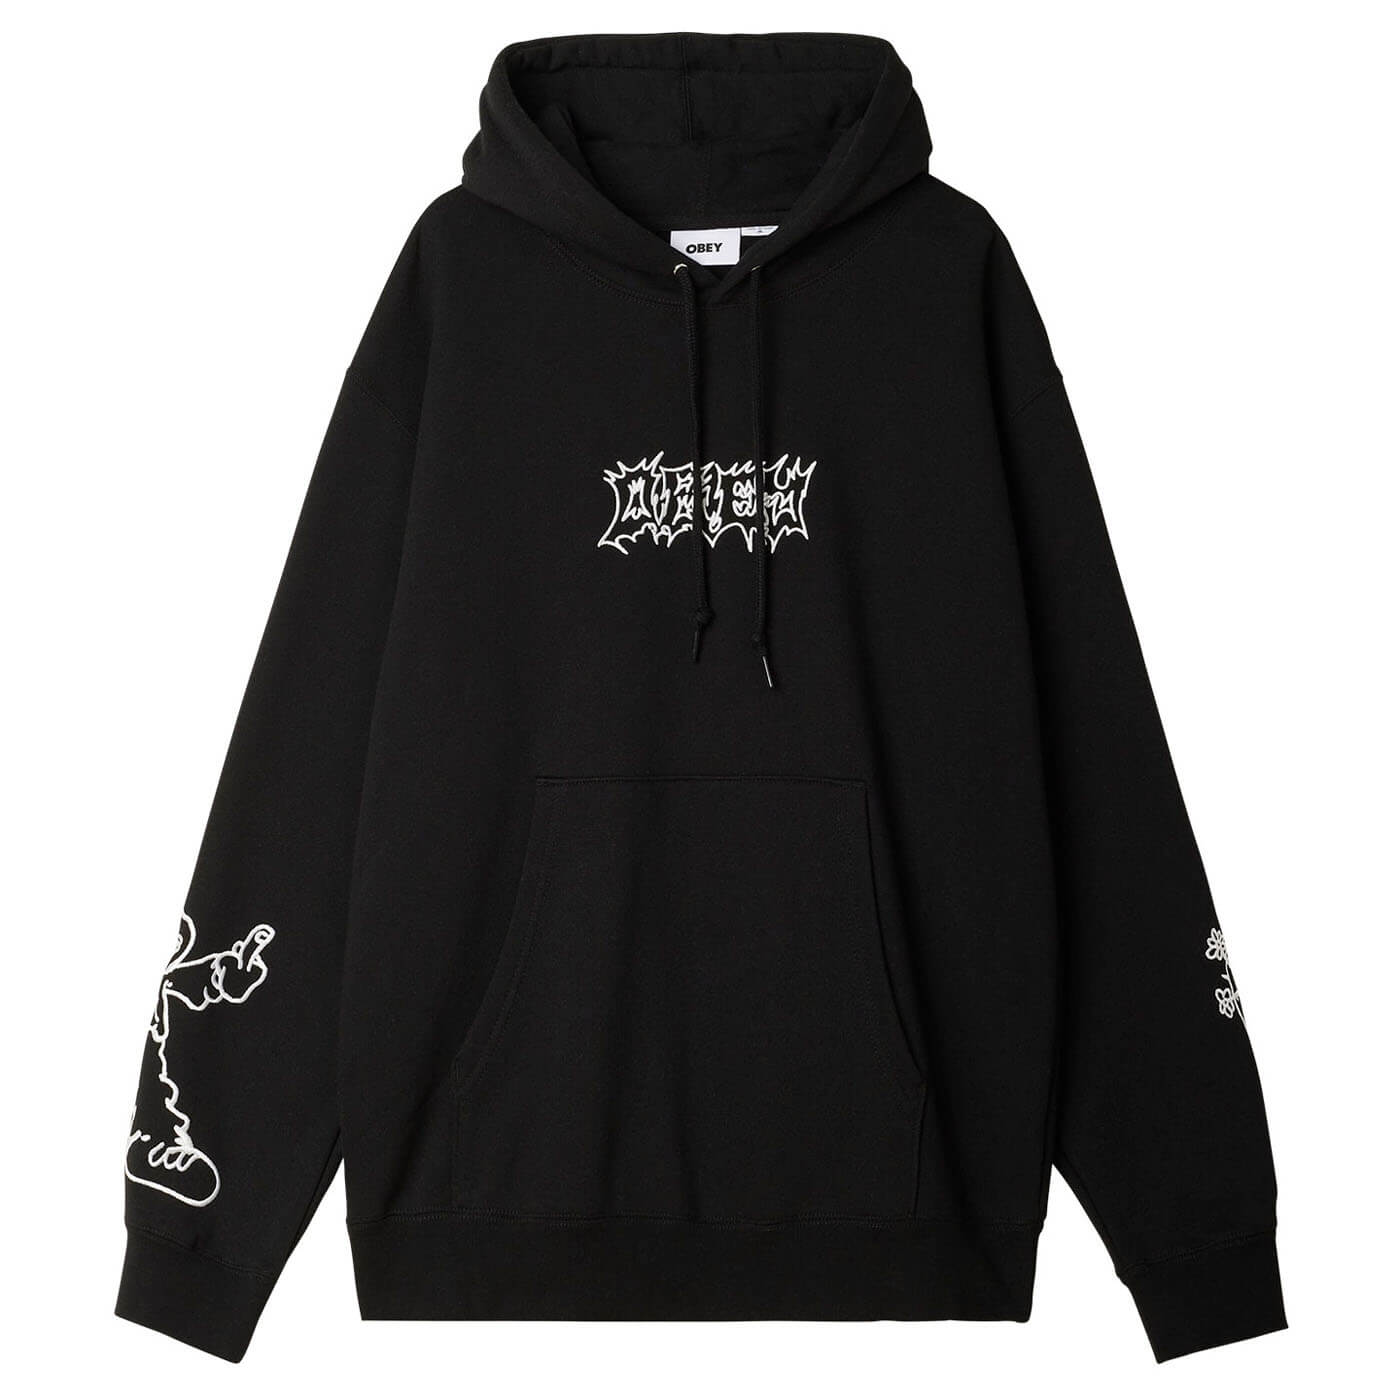 Men's Hooded Sweatshirts at OBEY Clothing UK - Graphics and more